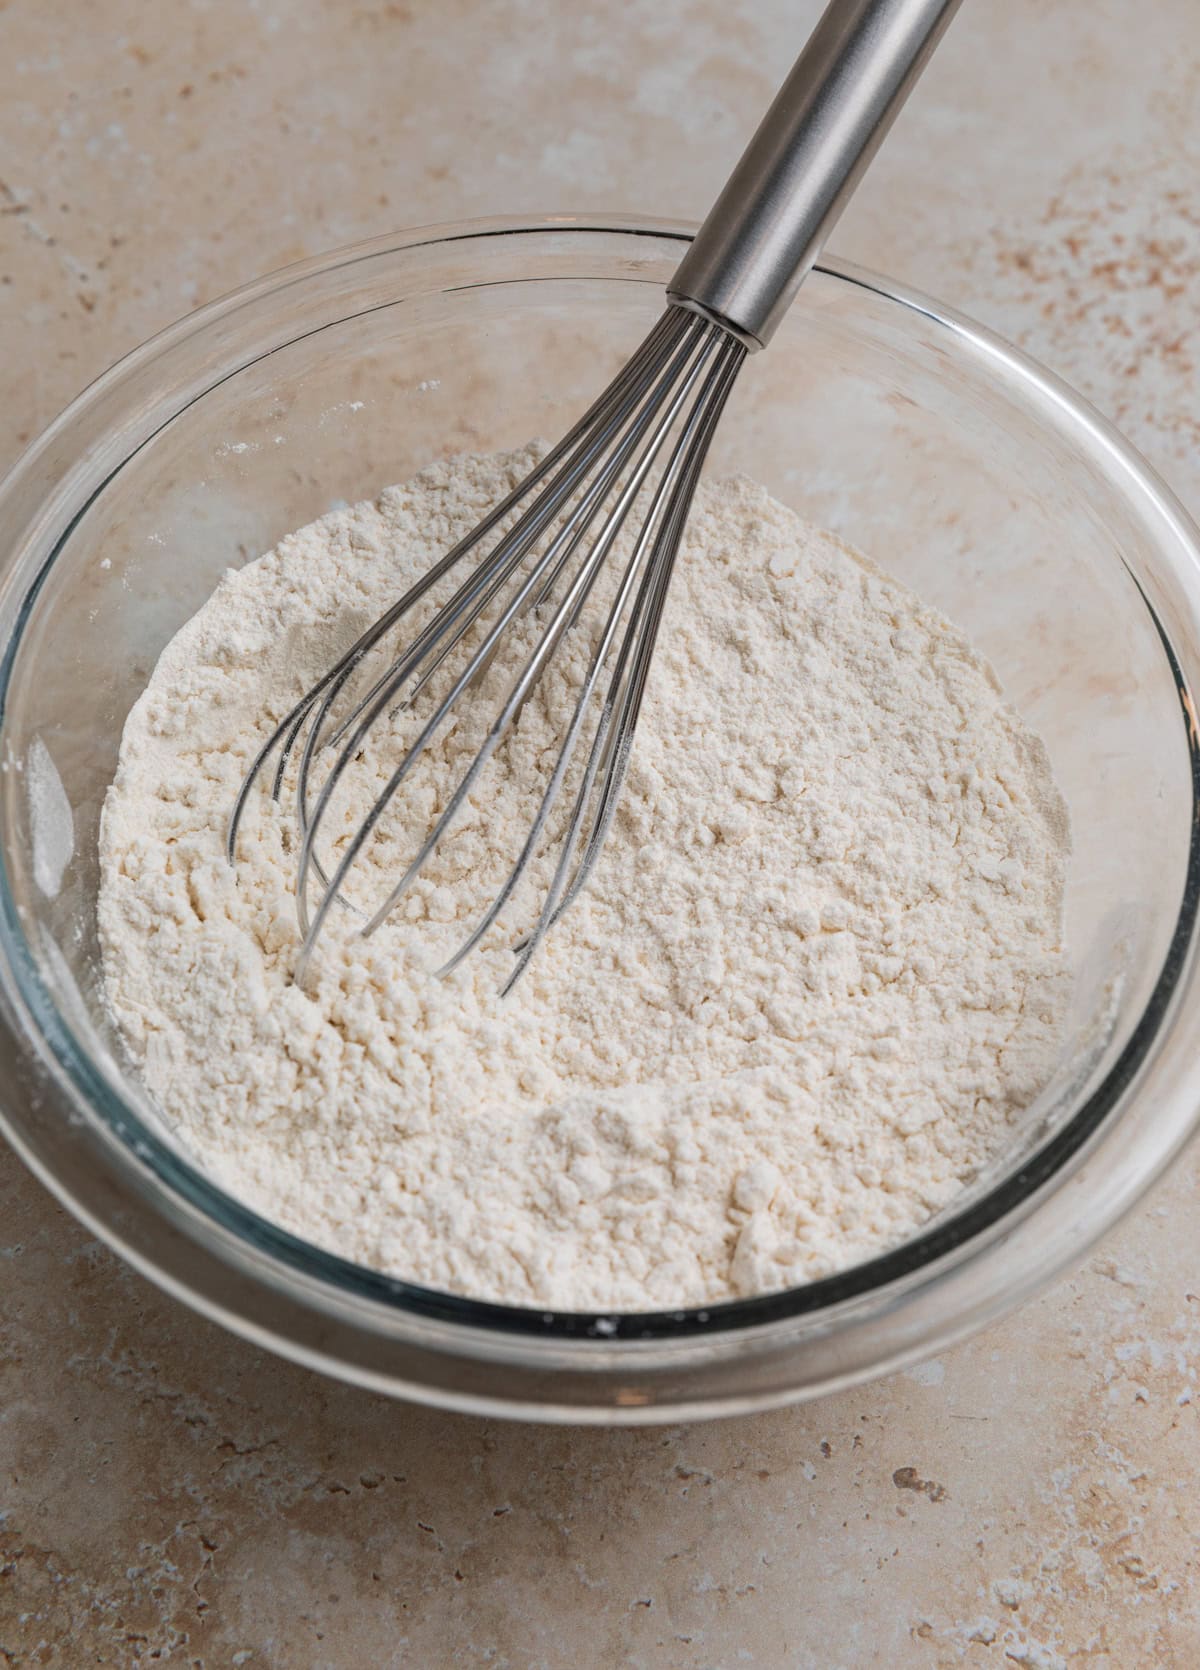 Whisk in bowl with flour and dry ingredients for recipe.